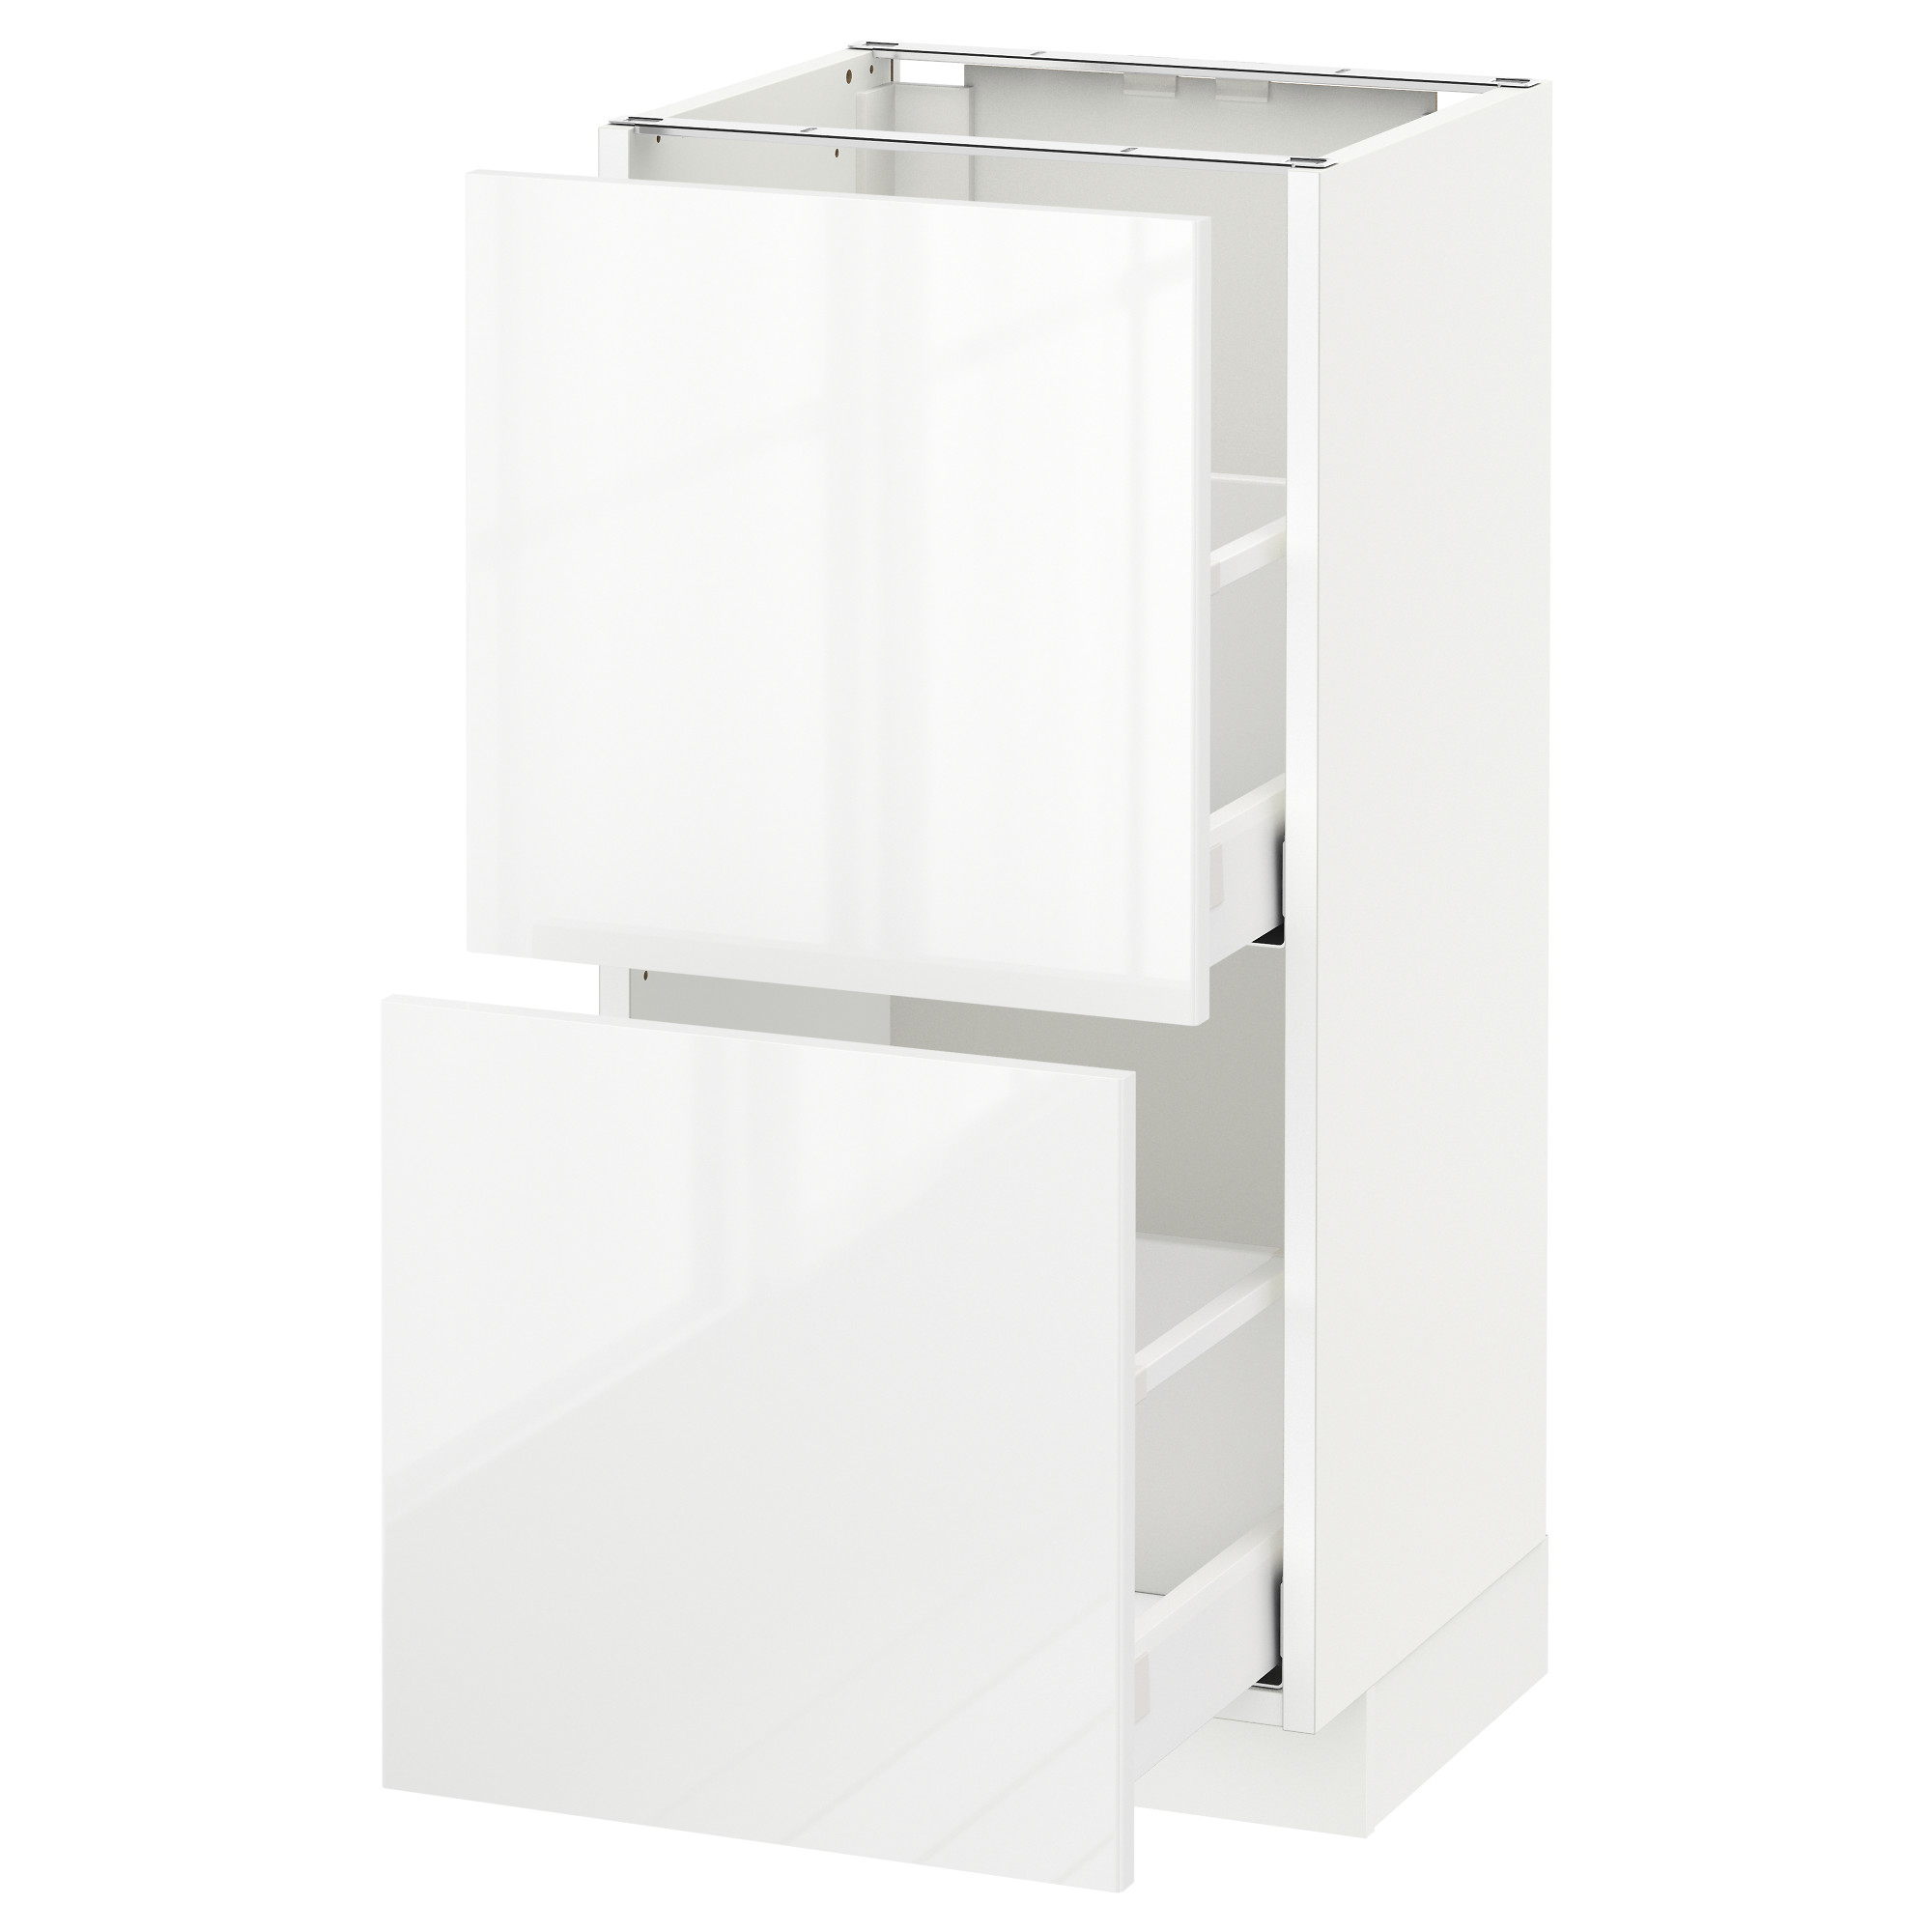 METOD base cabinet with 2 drawers